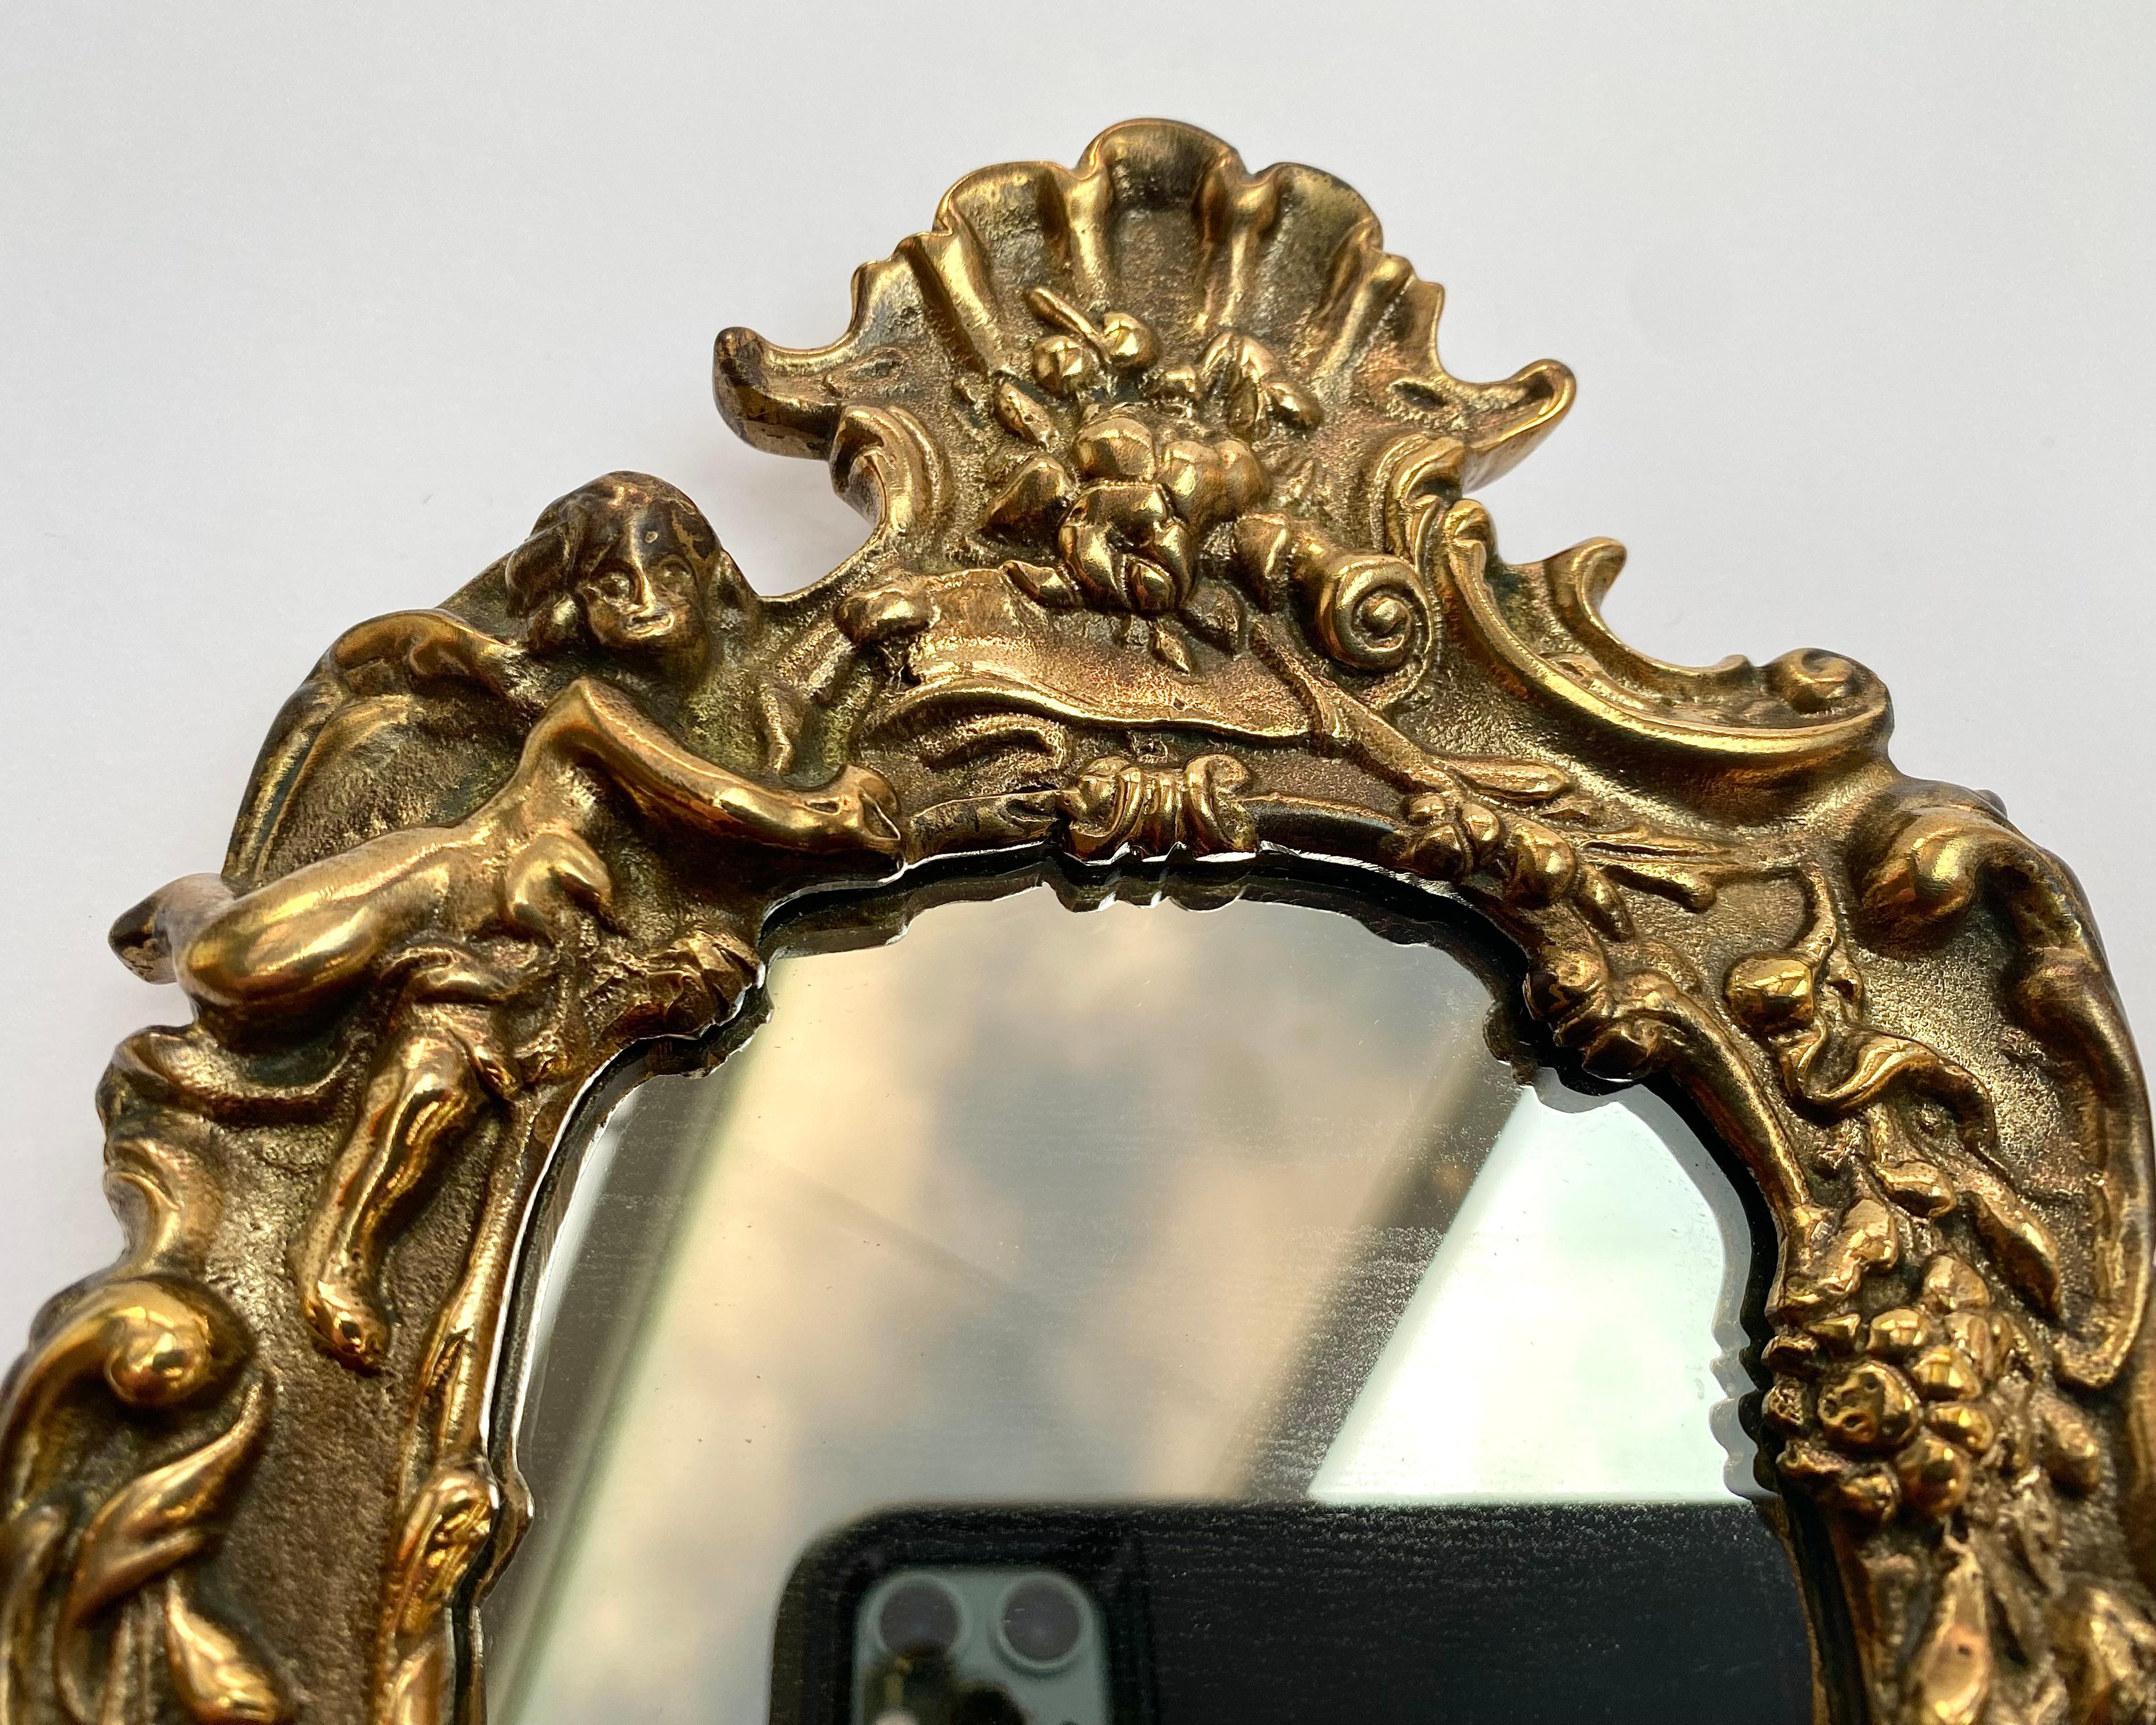 Very rare luxurious table mirror, France, 1900.

Produced using traditional bronze casting technology.

Fits perfectly into any classic or vintage interior. It will be a good gift for all bronze lovers.

The magnificent design of the table mirror